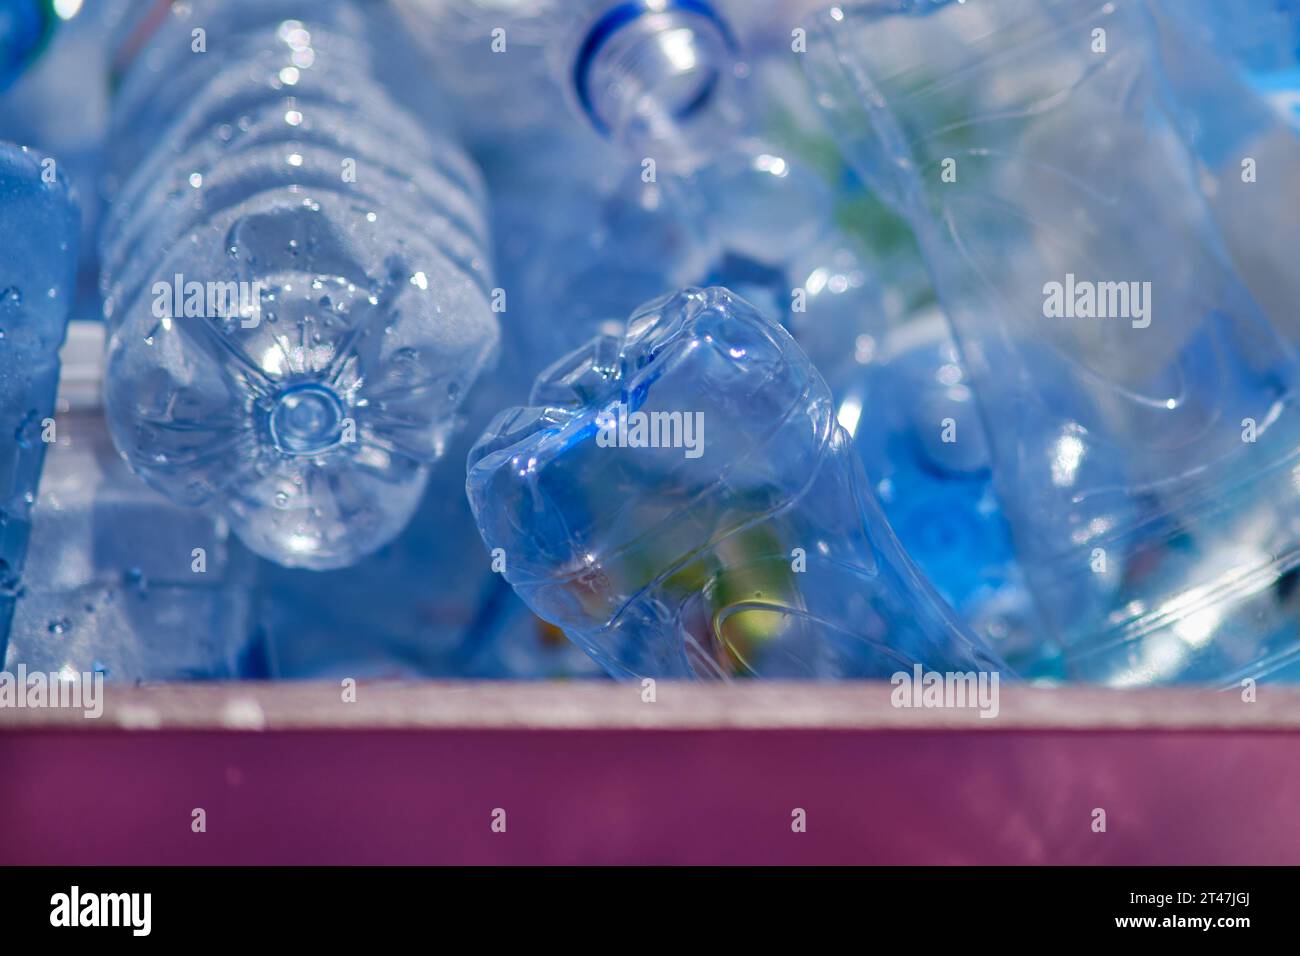 Plastic bottles of water are stored in a recycling center Stock Photo